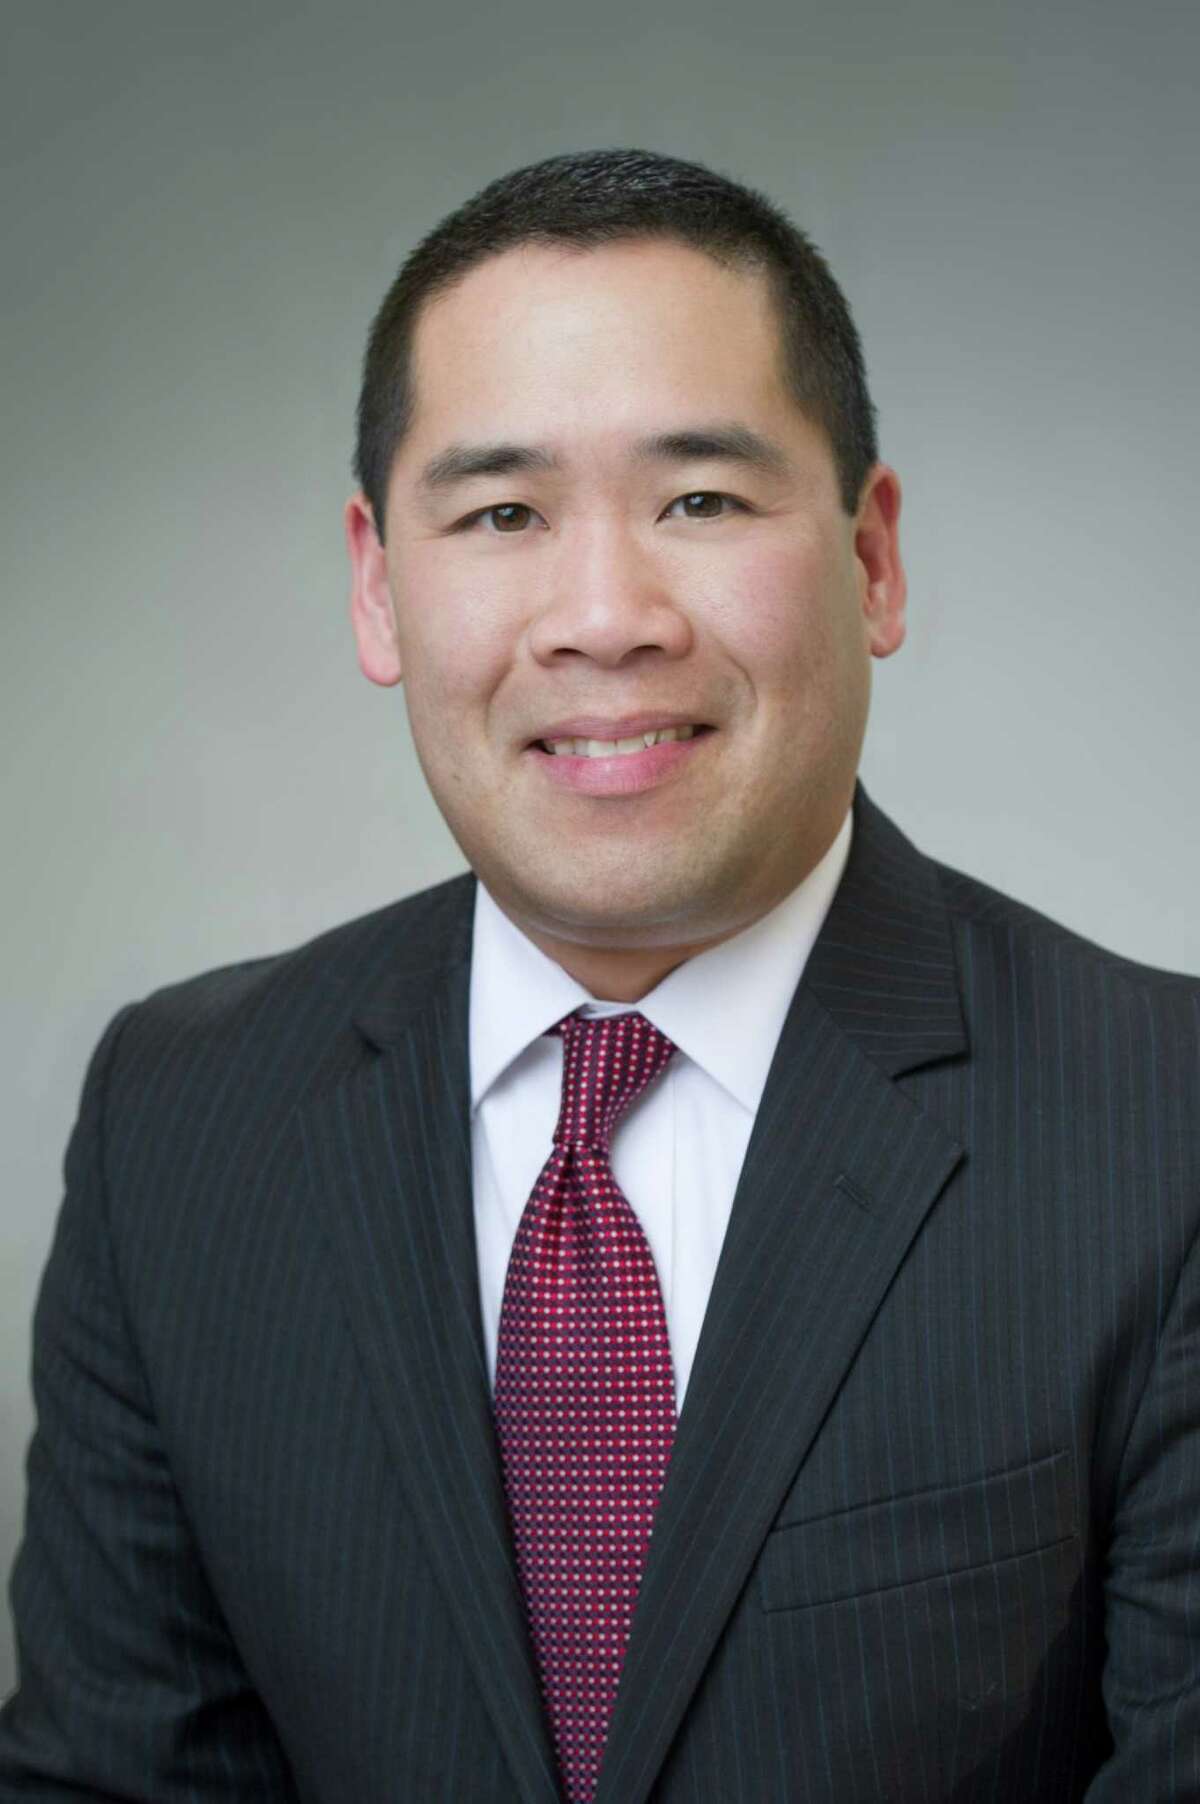 Calvin Woo, a partner in Westport-based Verrill Dana, has been appointed to the Board of Directors of the Connecticut Bar Foundation.